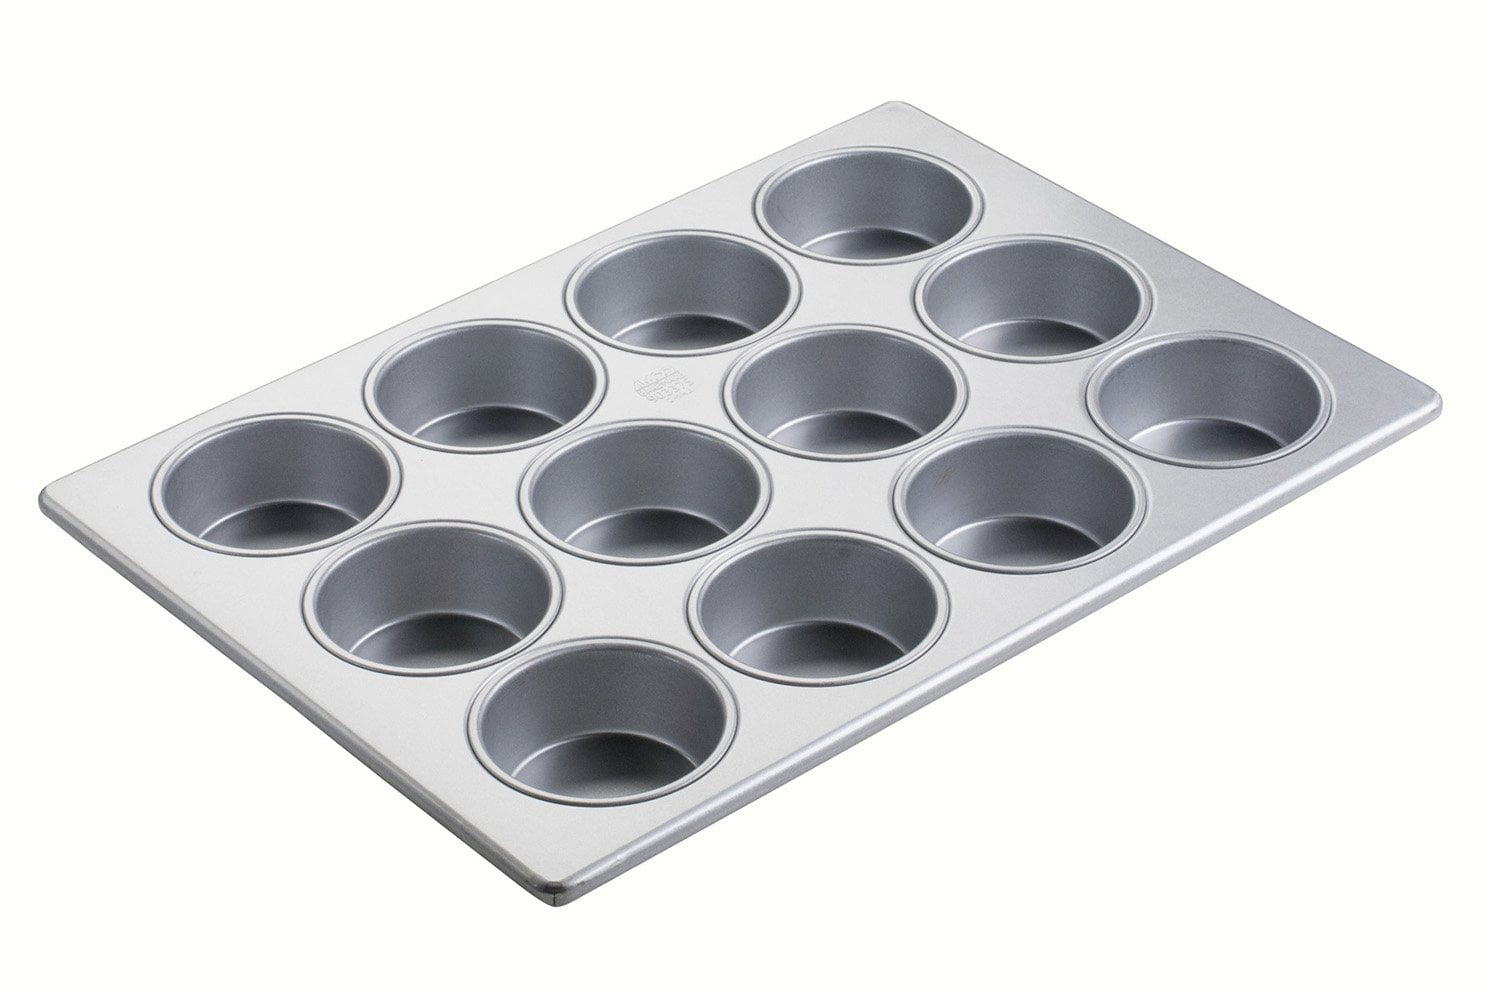 Muffin Pan 12 Cup at Whole Foods Market